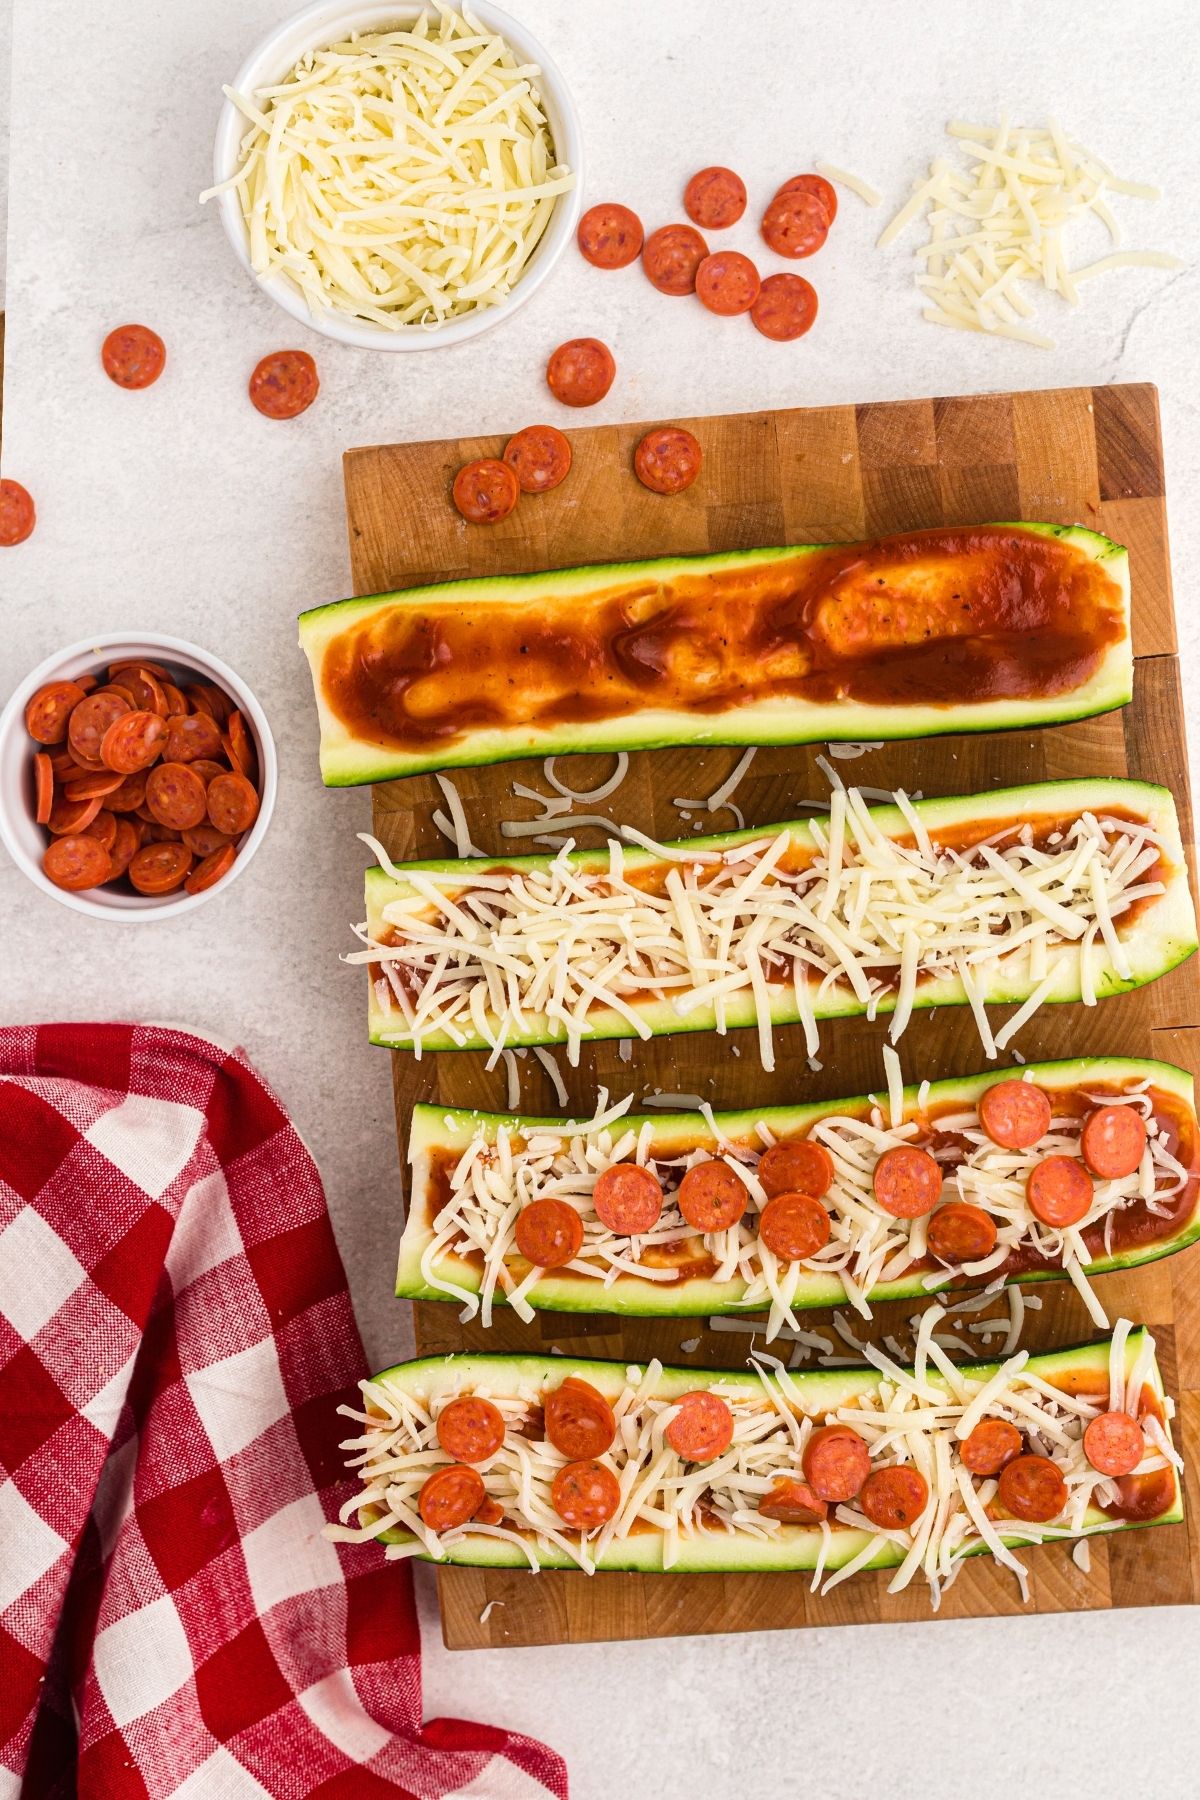 Zucchini cut into slices and topped with cheese, sauce, and pepperonis